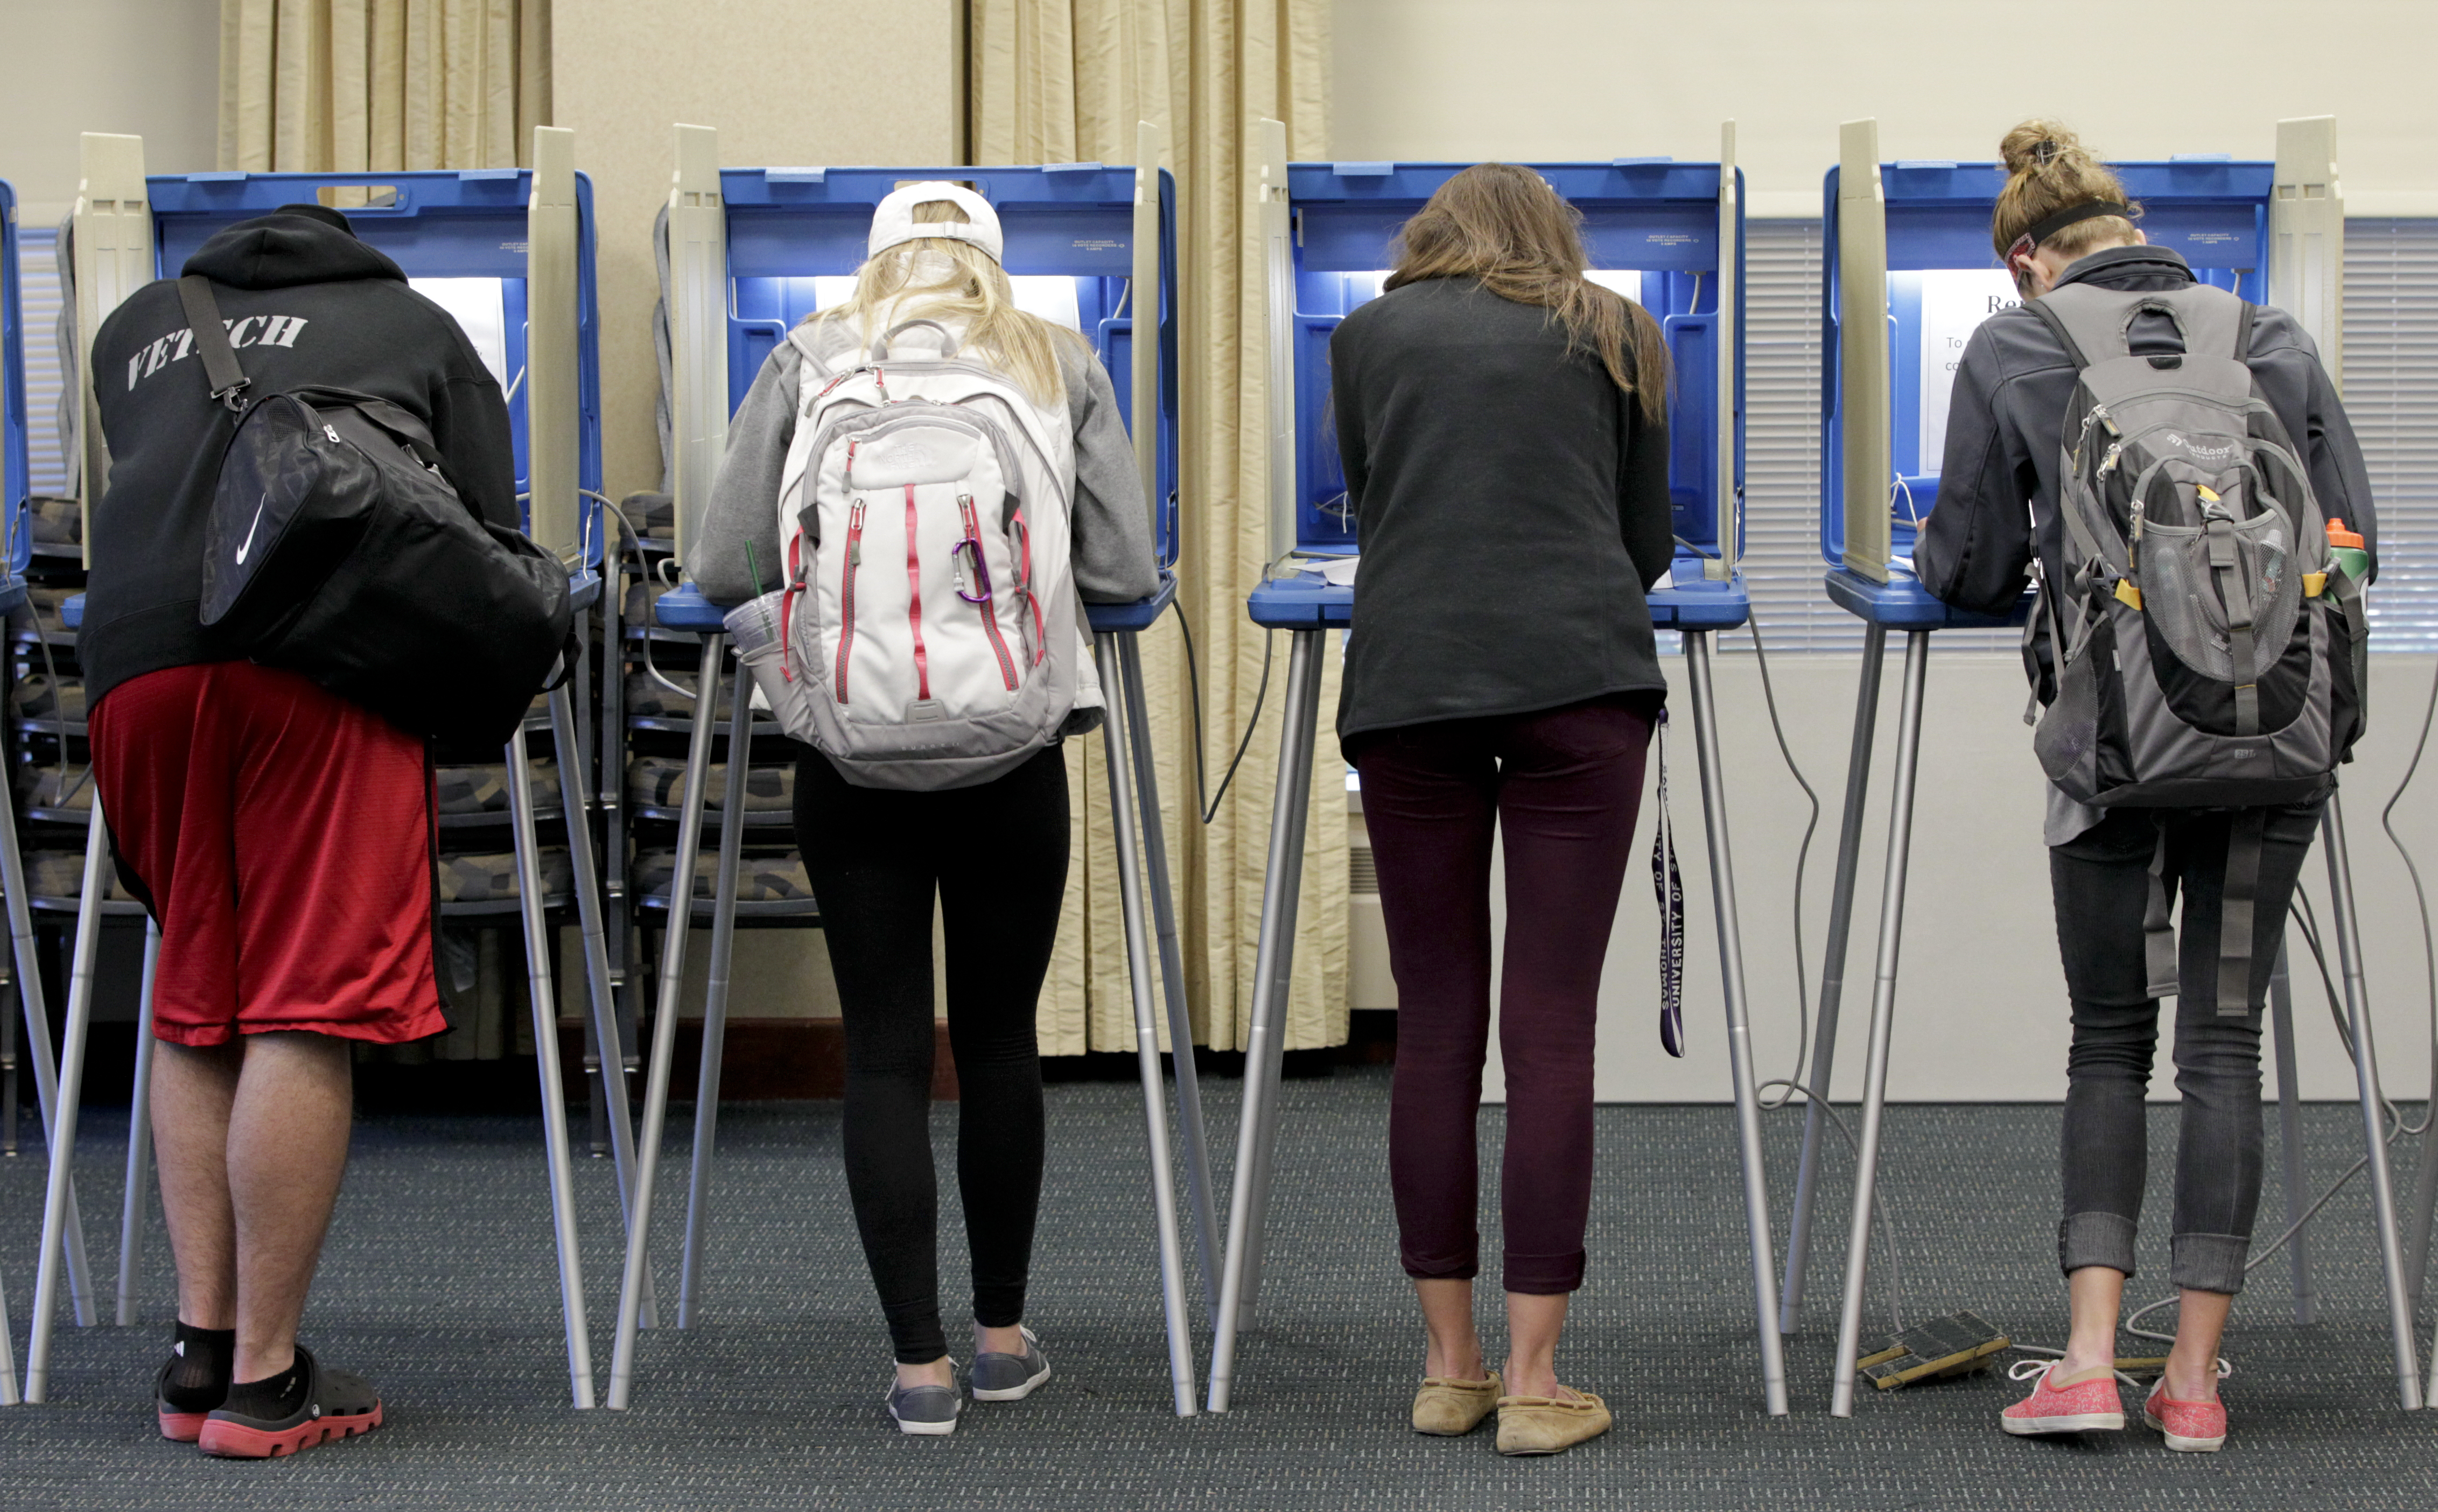 HF3447 would require a county auditor to designate one additional polling place on the campus of a postsecondary institution, at the request of that institution. (House Photography file photo)